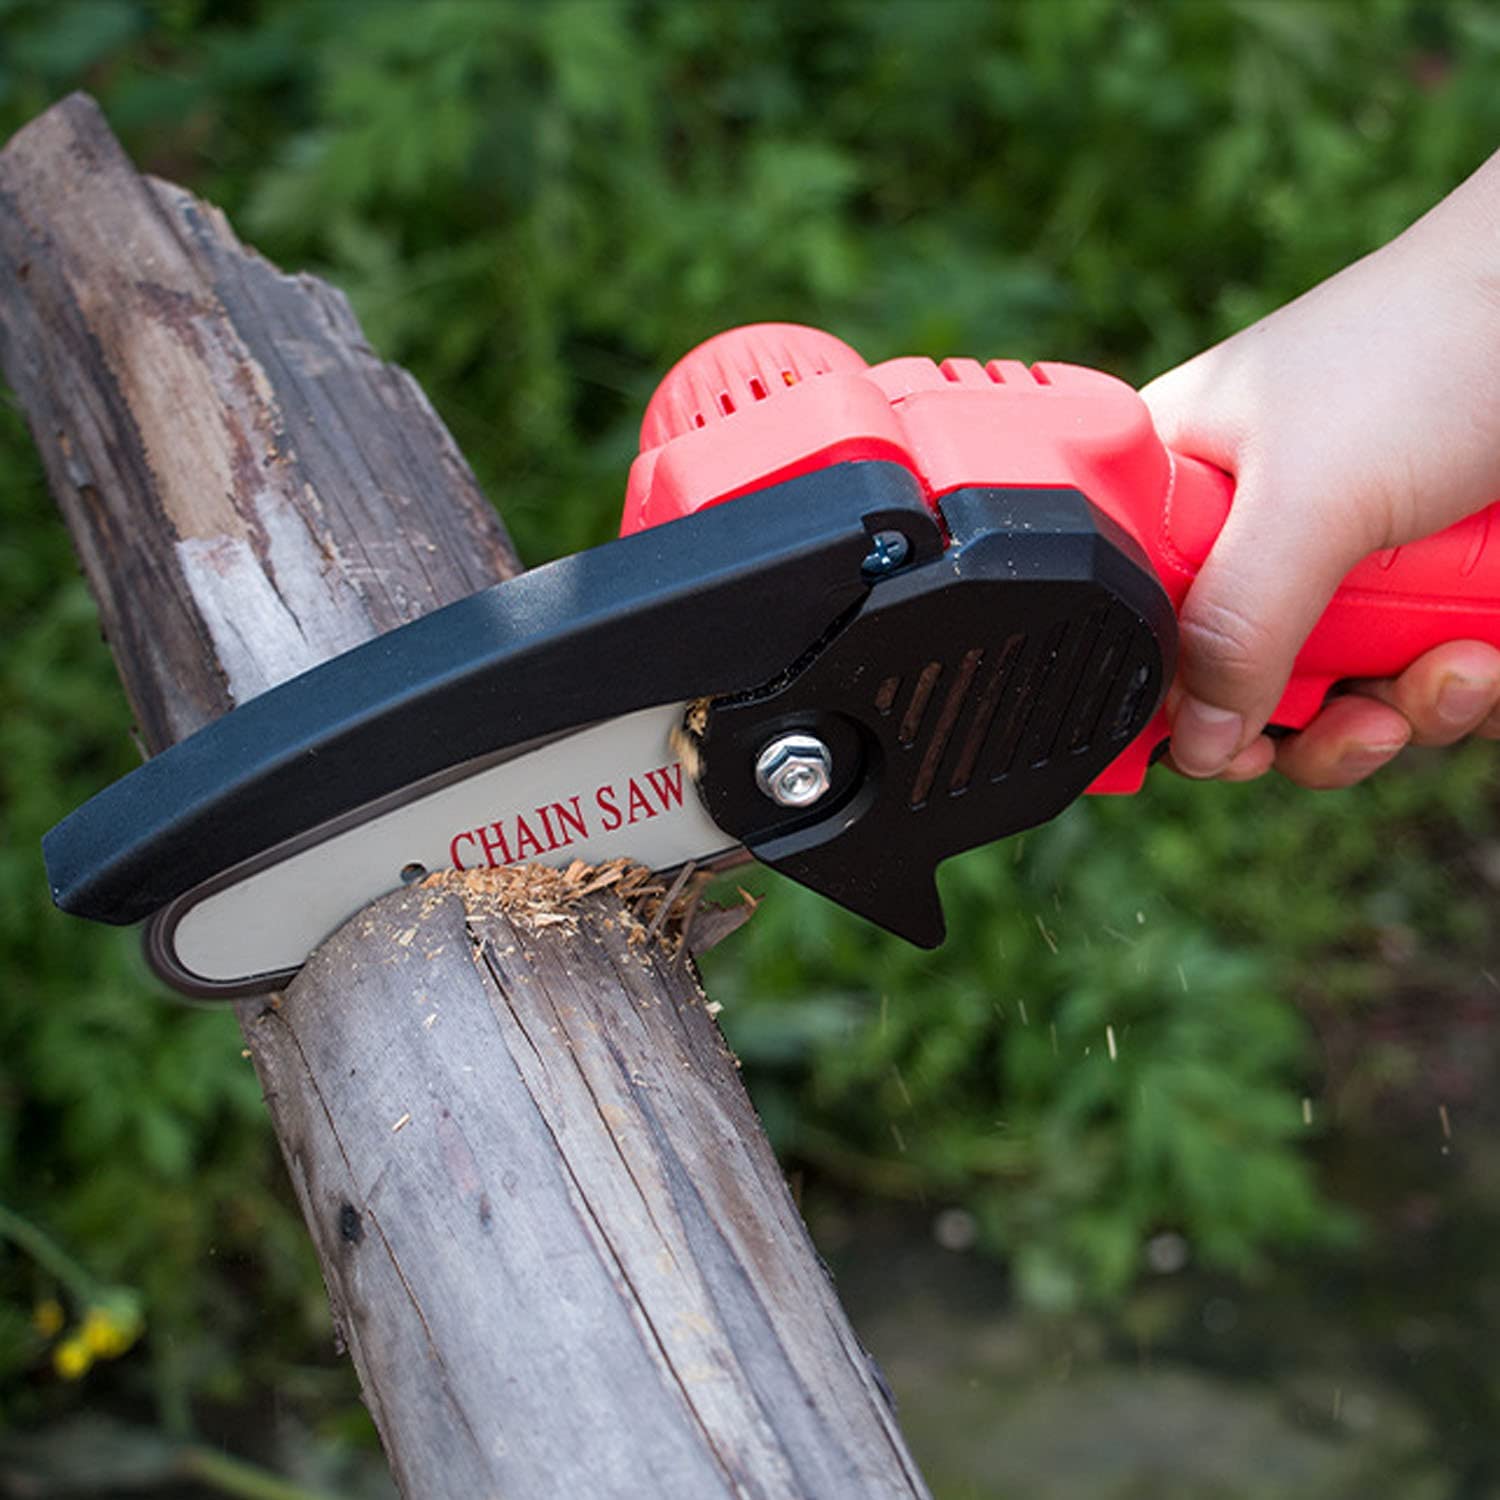 4 inch Mini Chainsaw Cordless Portable Handheld Electric Power Chain Saw with 2 Rechargeable Battery and Replaceable Chain,For Tree Branch Wood Cutting Logging Garden Pruning Shears Patio Trimming